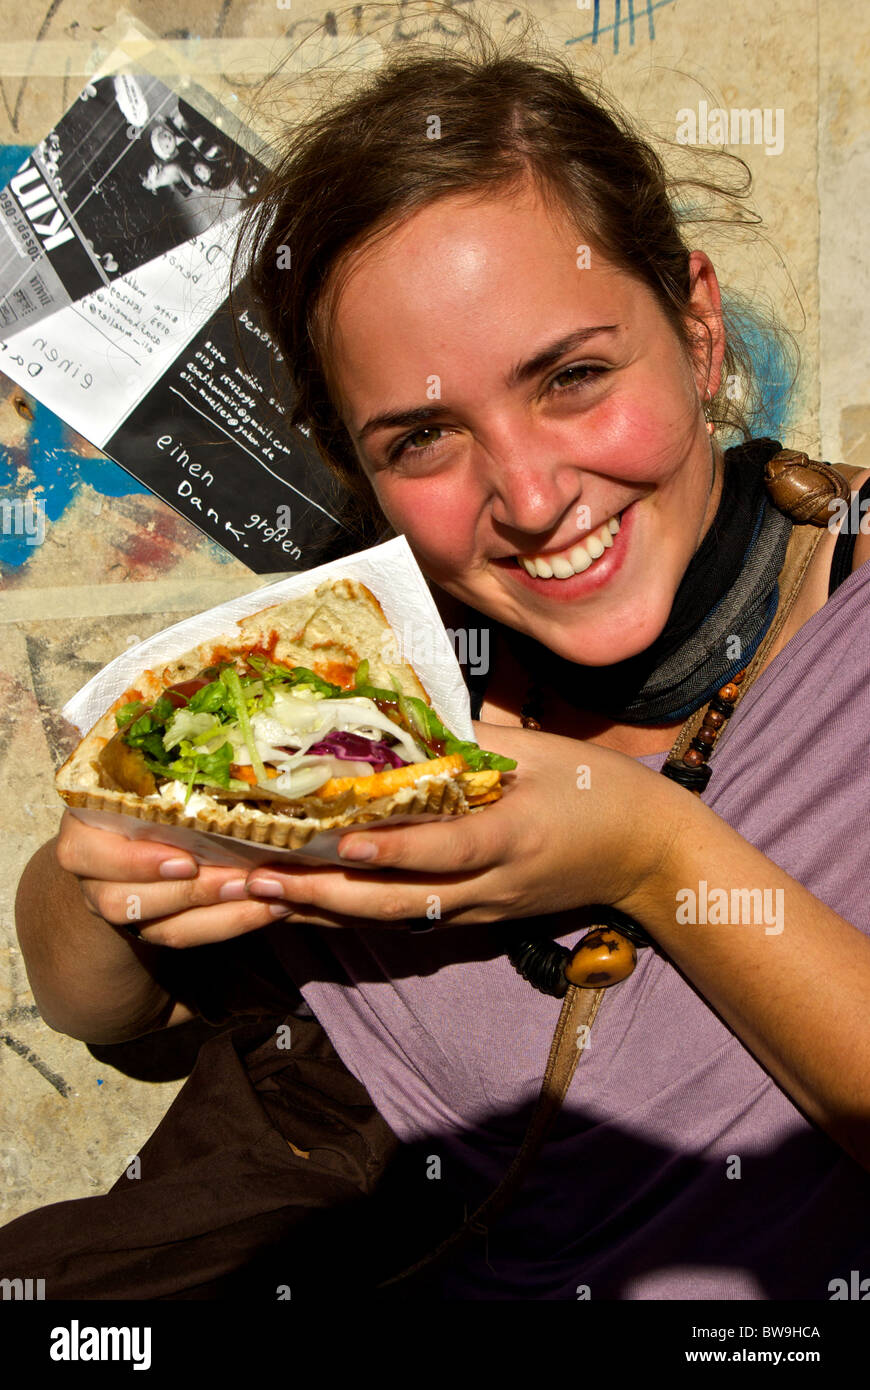 Pretty young American female holding enormous vegetarian pita pocket takeout sandwich in Dresden new town neustadt Stock Photo